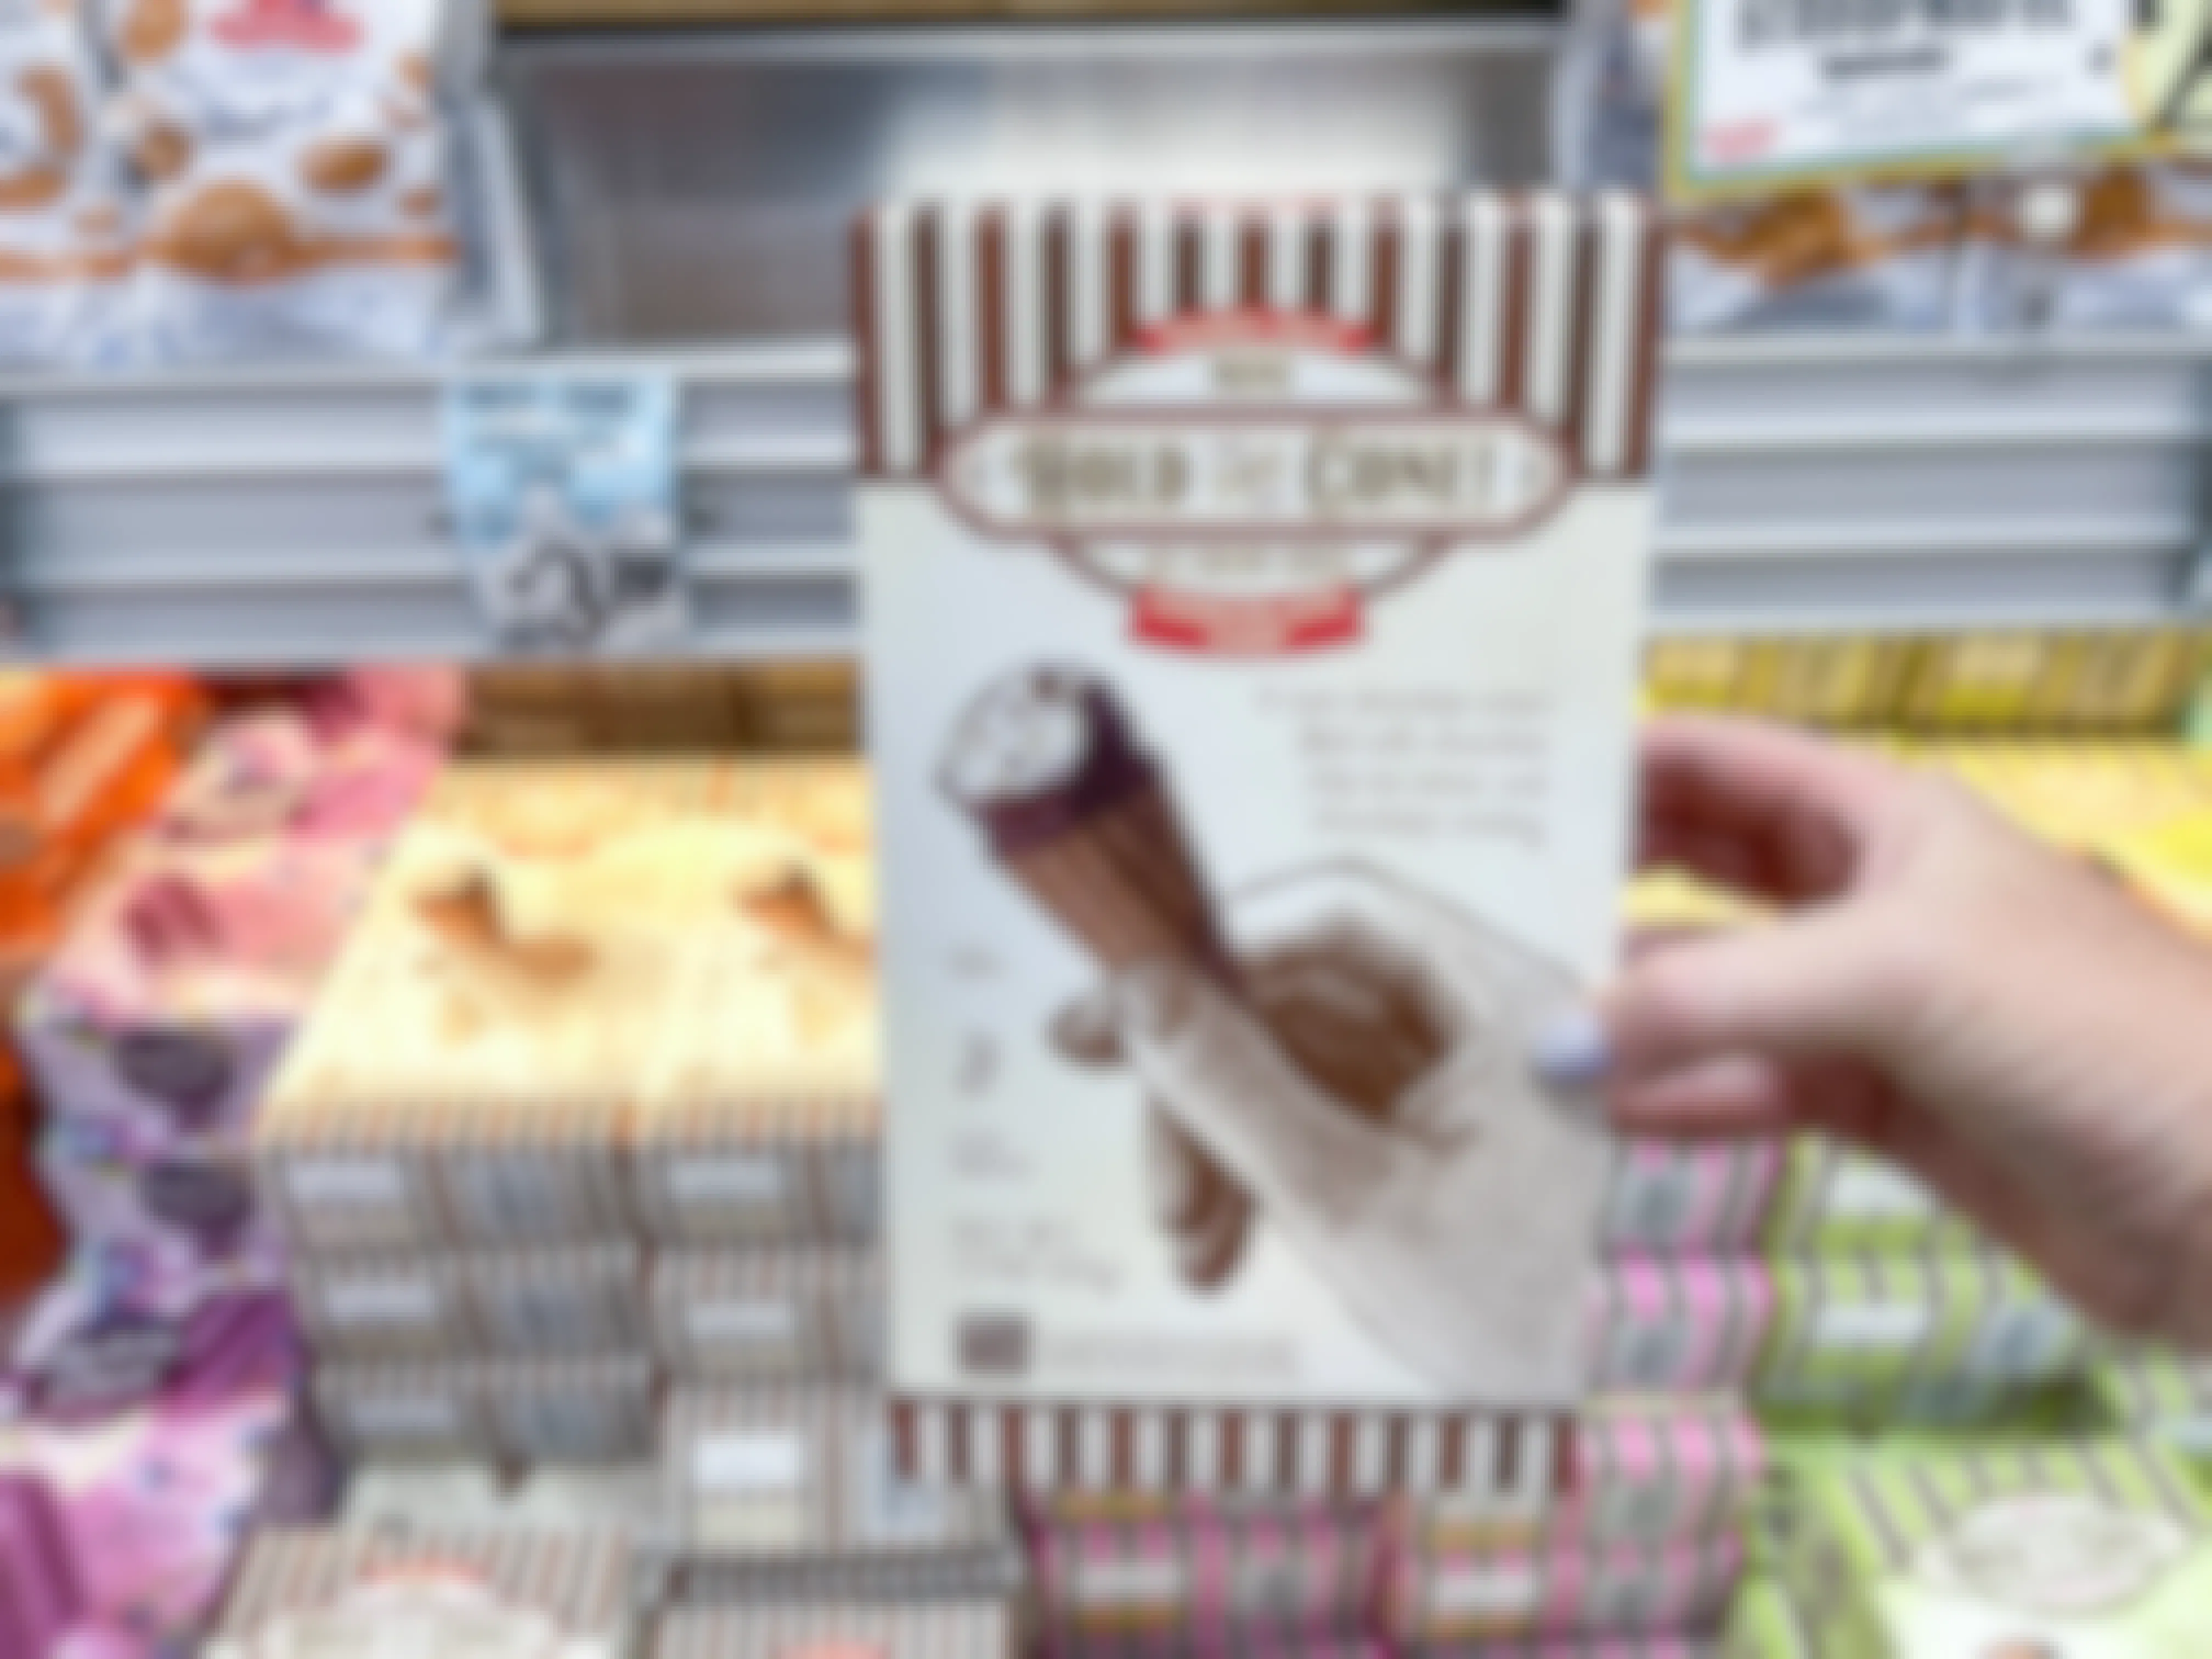 A person's hand holding a box fo Trader Joe's Mini Hold the Cone Ice Cream Cones in front of a freezer shelf inside Trader Joe's.